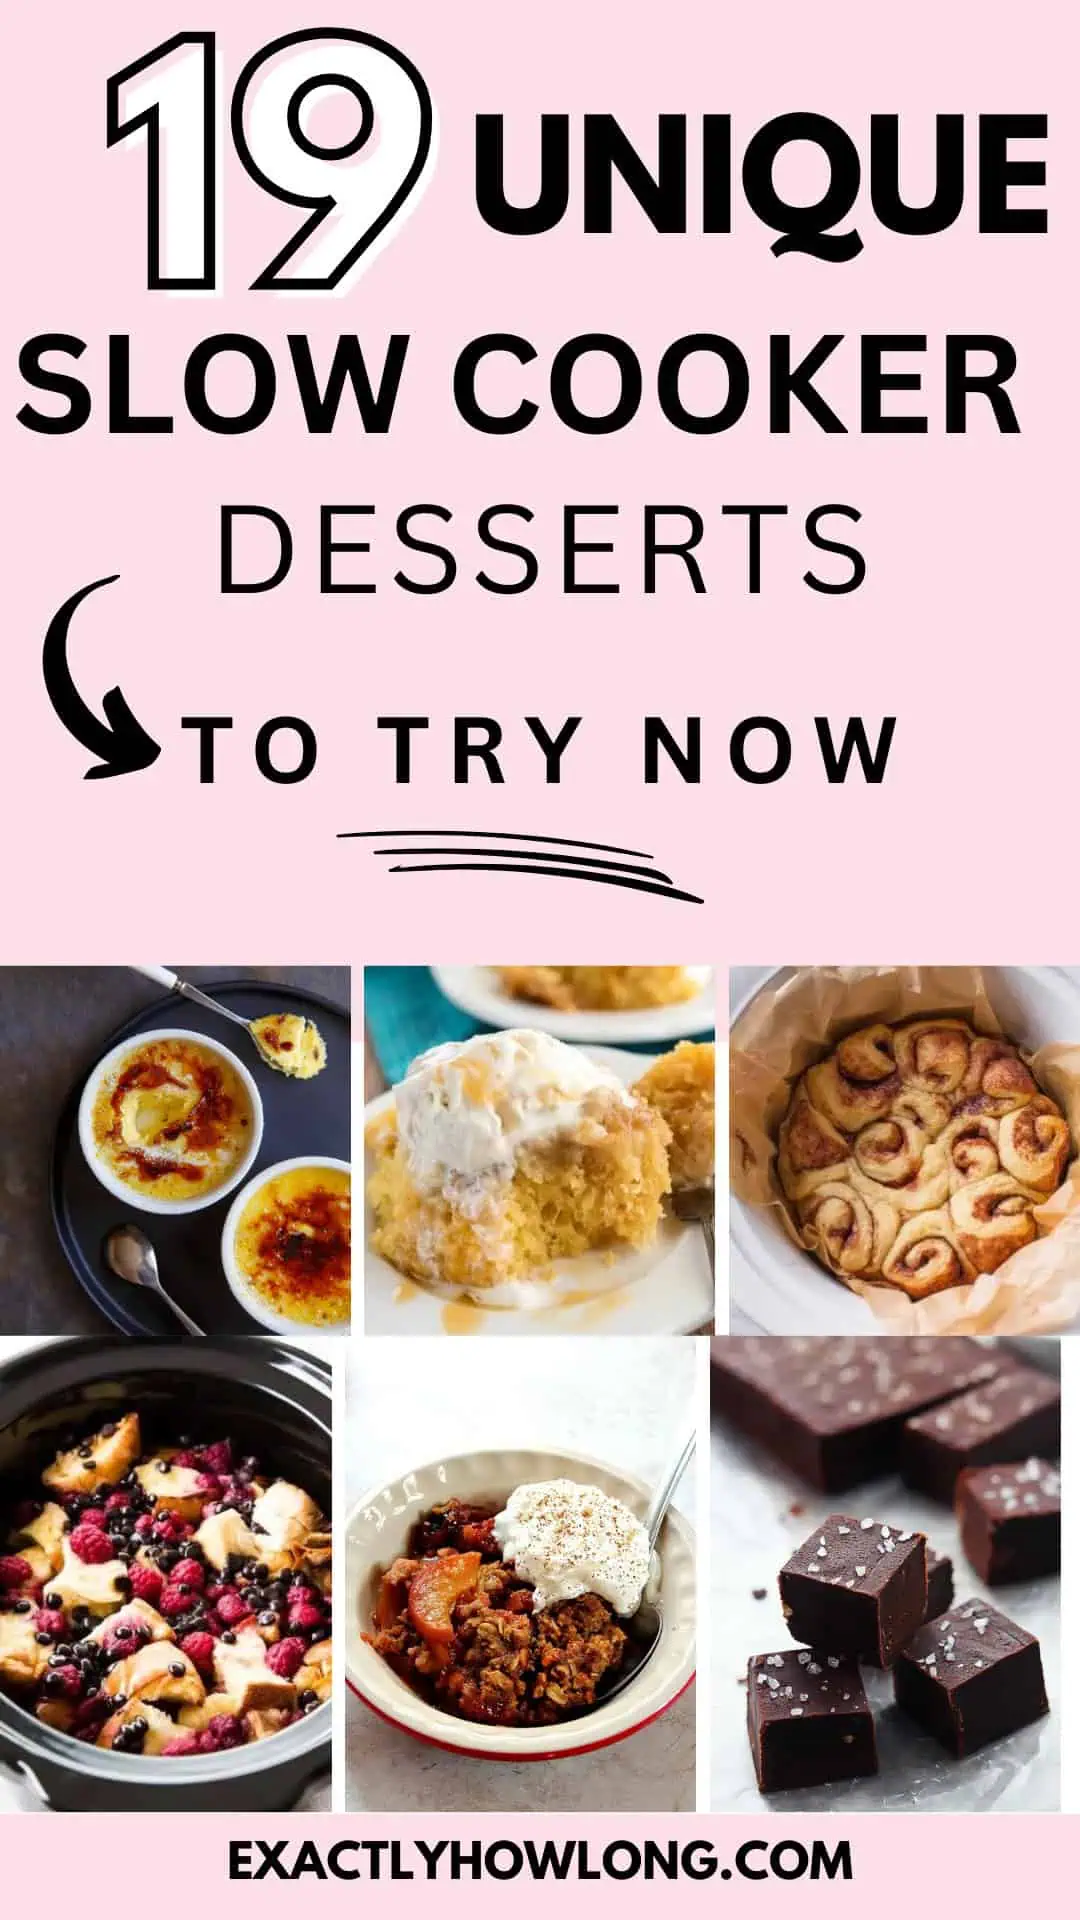 Simple slow cooker desserts for a crowd